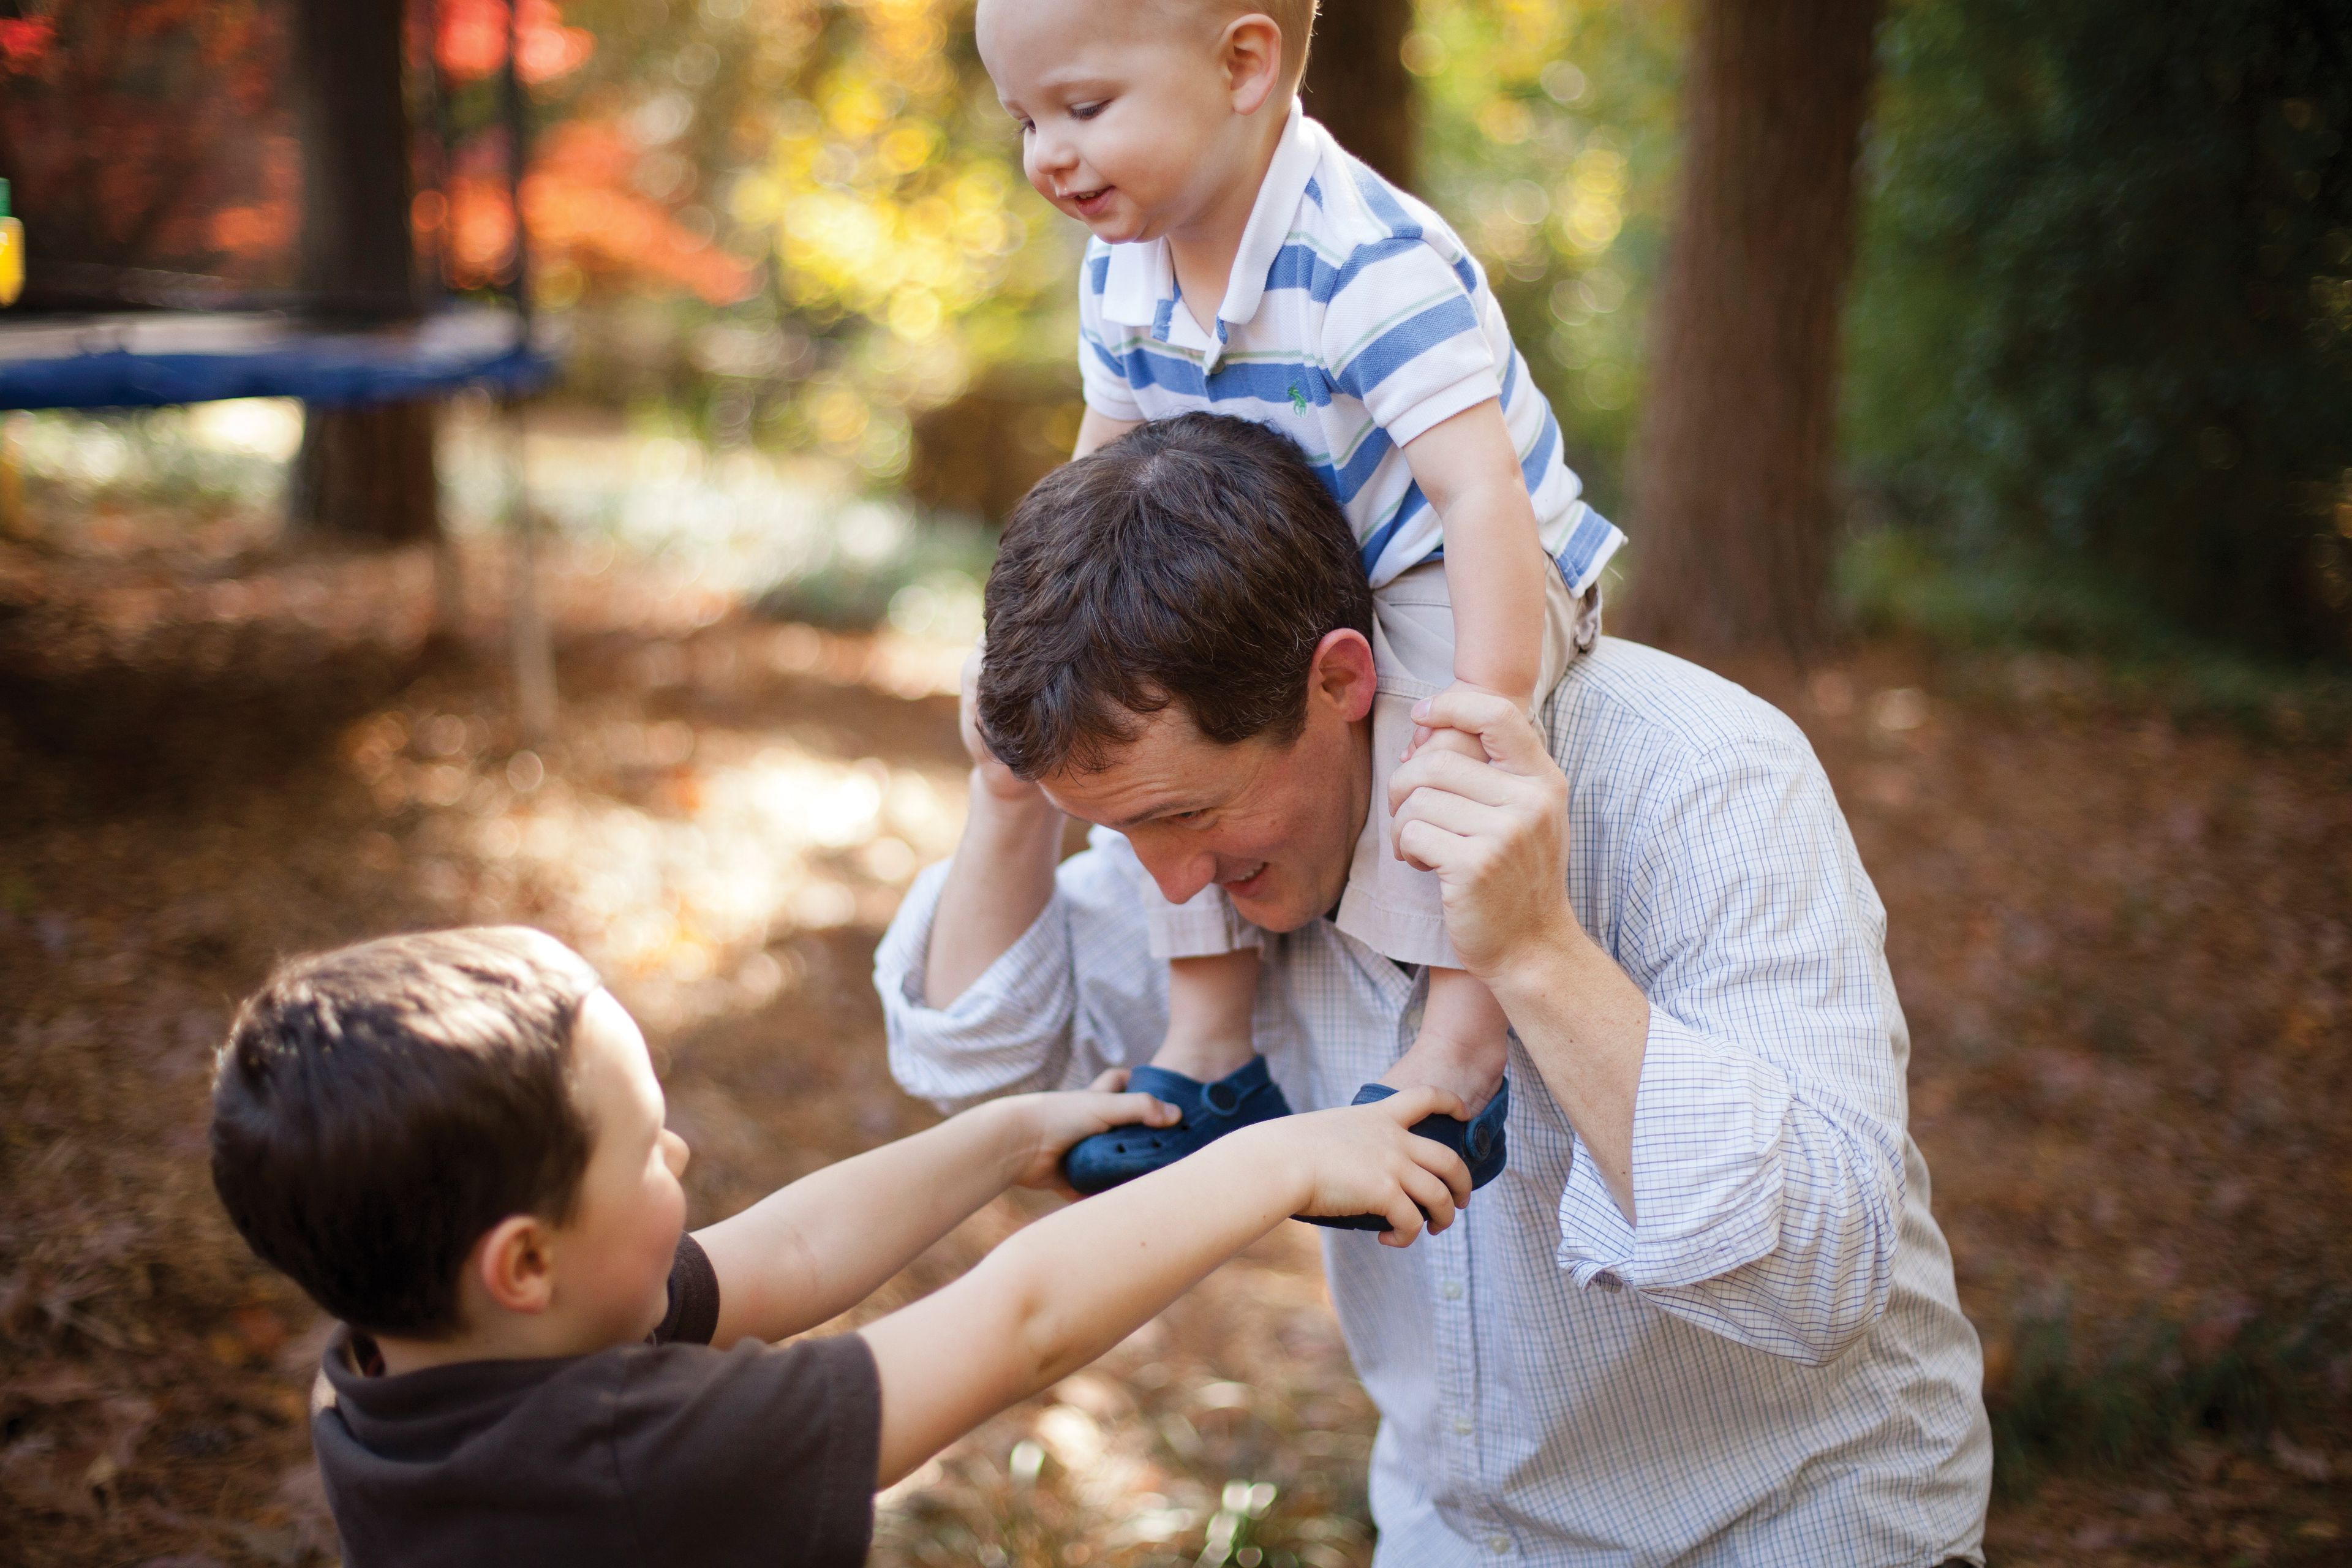 A father plays with his two young sons.